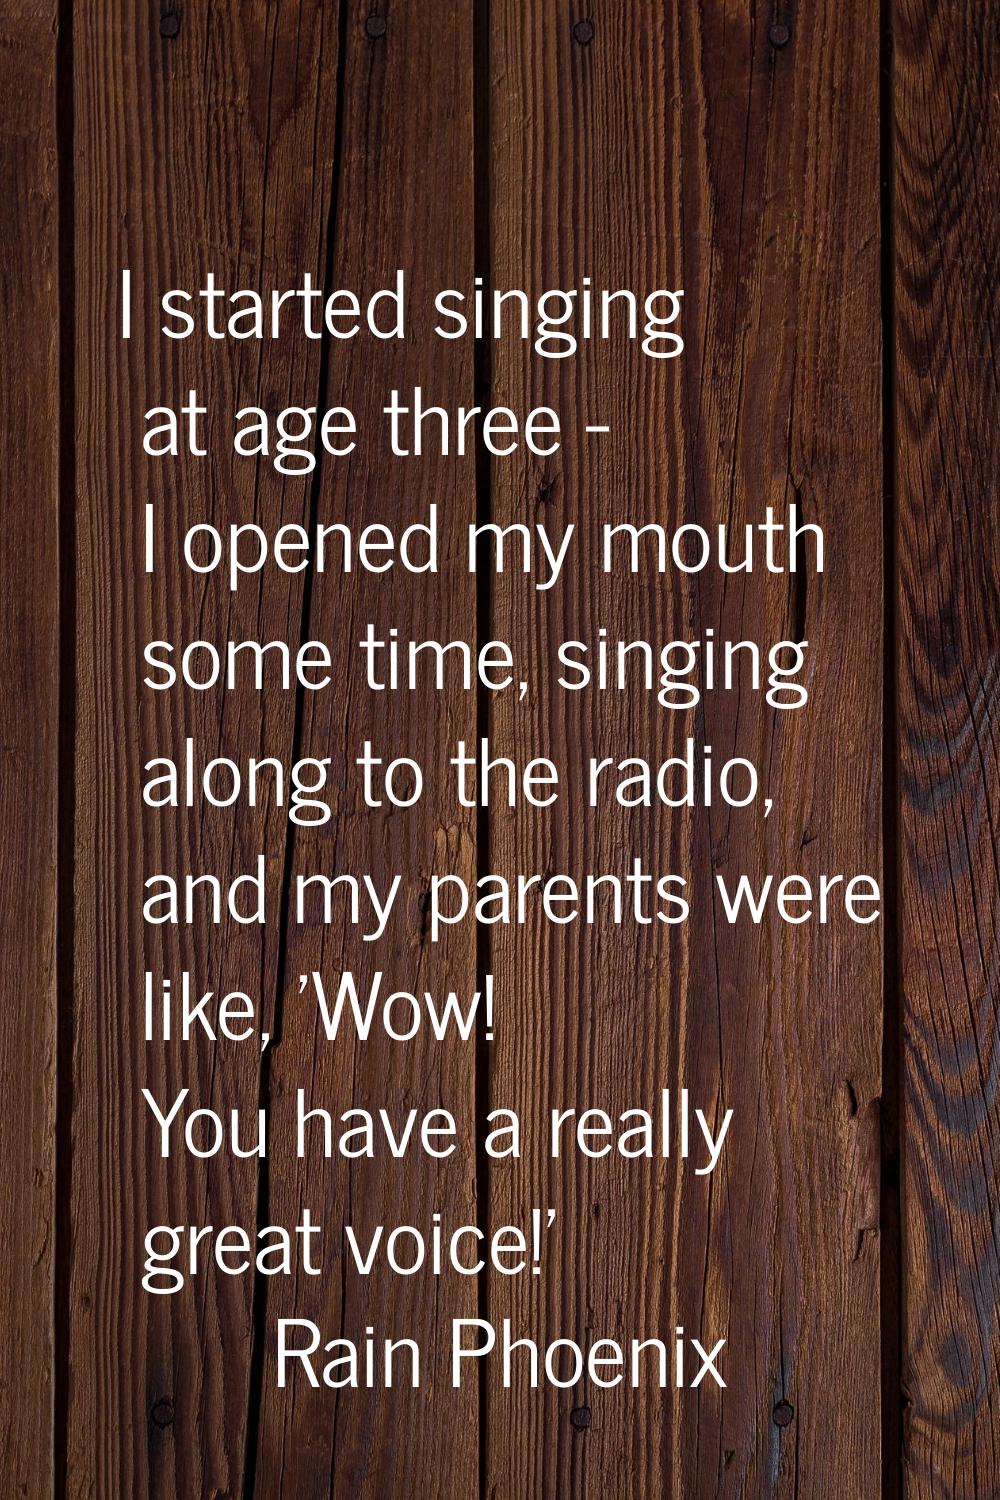 I started singing at age three - I opened my mouth some time, singing along to the radio, and my pa